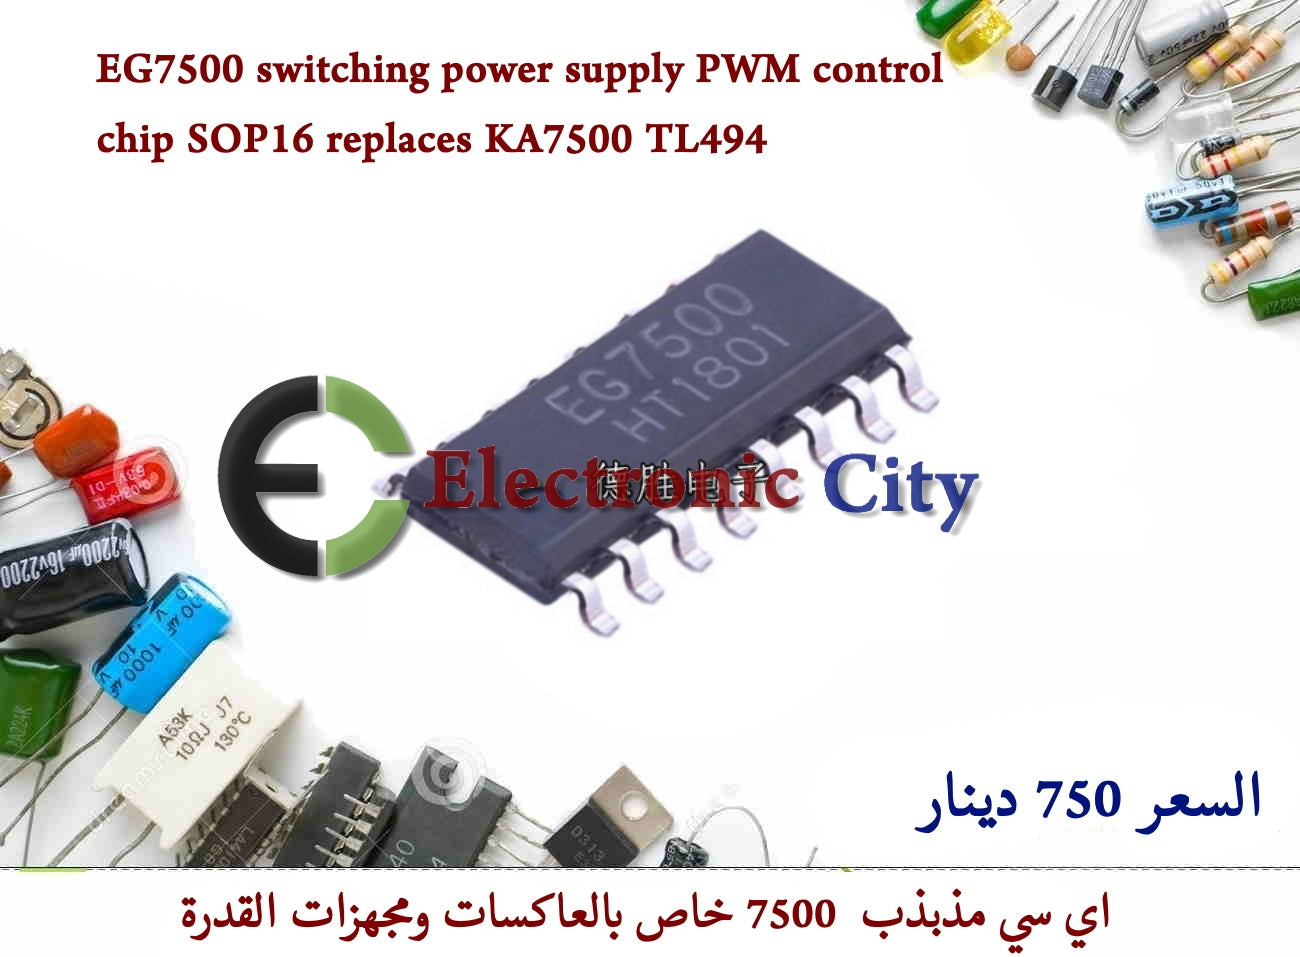 EG7500 switching power supply PWM control chip SOP16 replaces KA7500 TL494